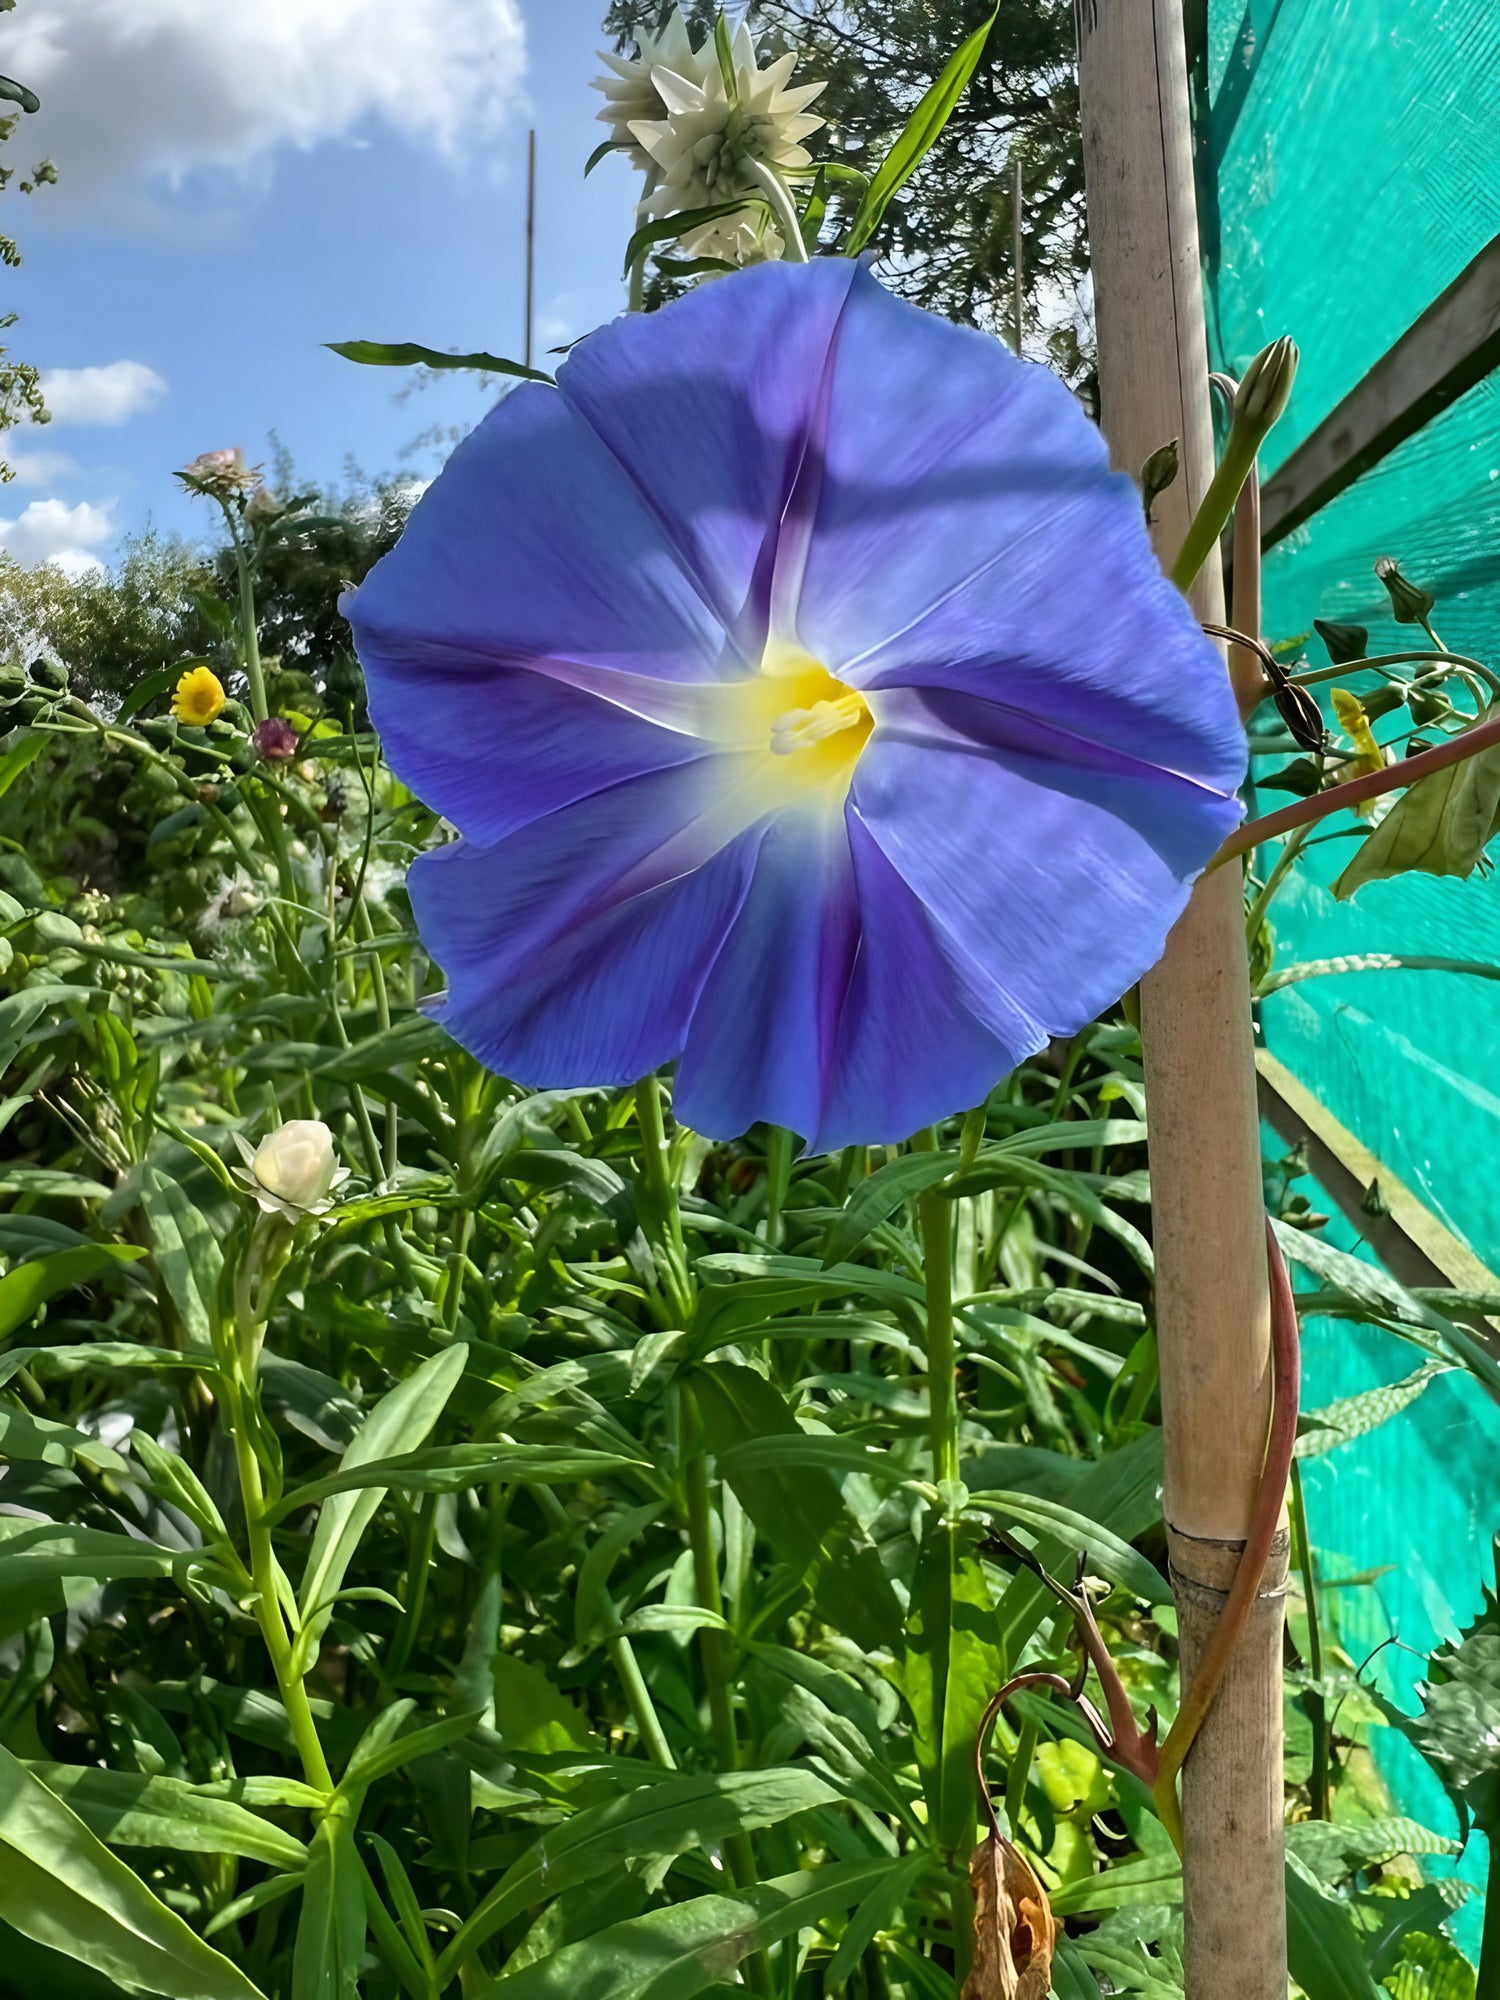 Ipomoea Heavenly Blue flower showcasing its vibrant blue petals and yellow stamen against a backdrop of green foliage